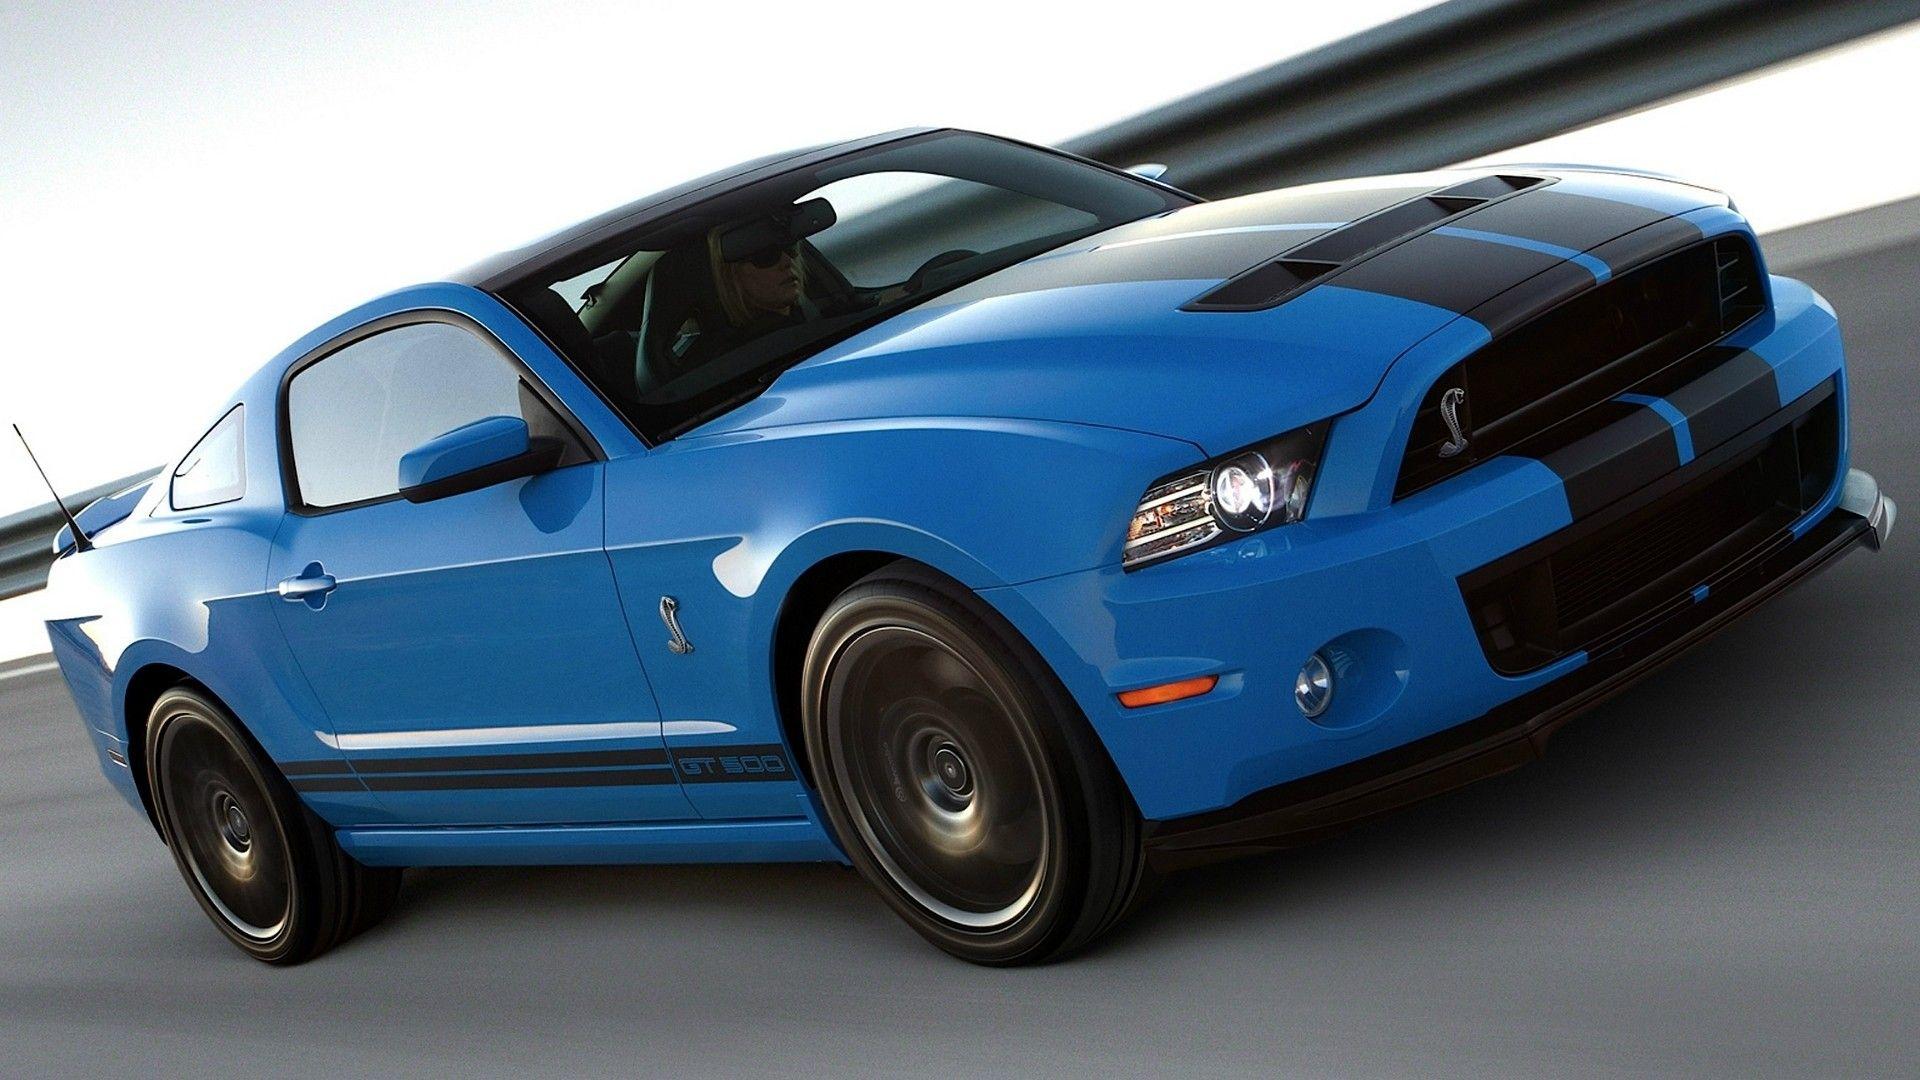 Ford Mustang Shelby GT500 HD Wallpaper of Car